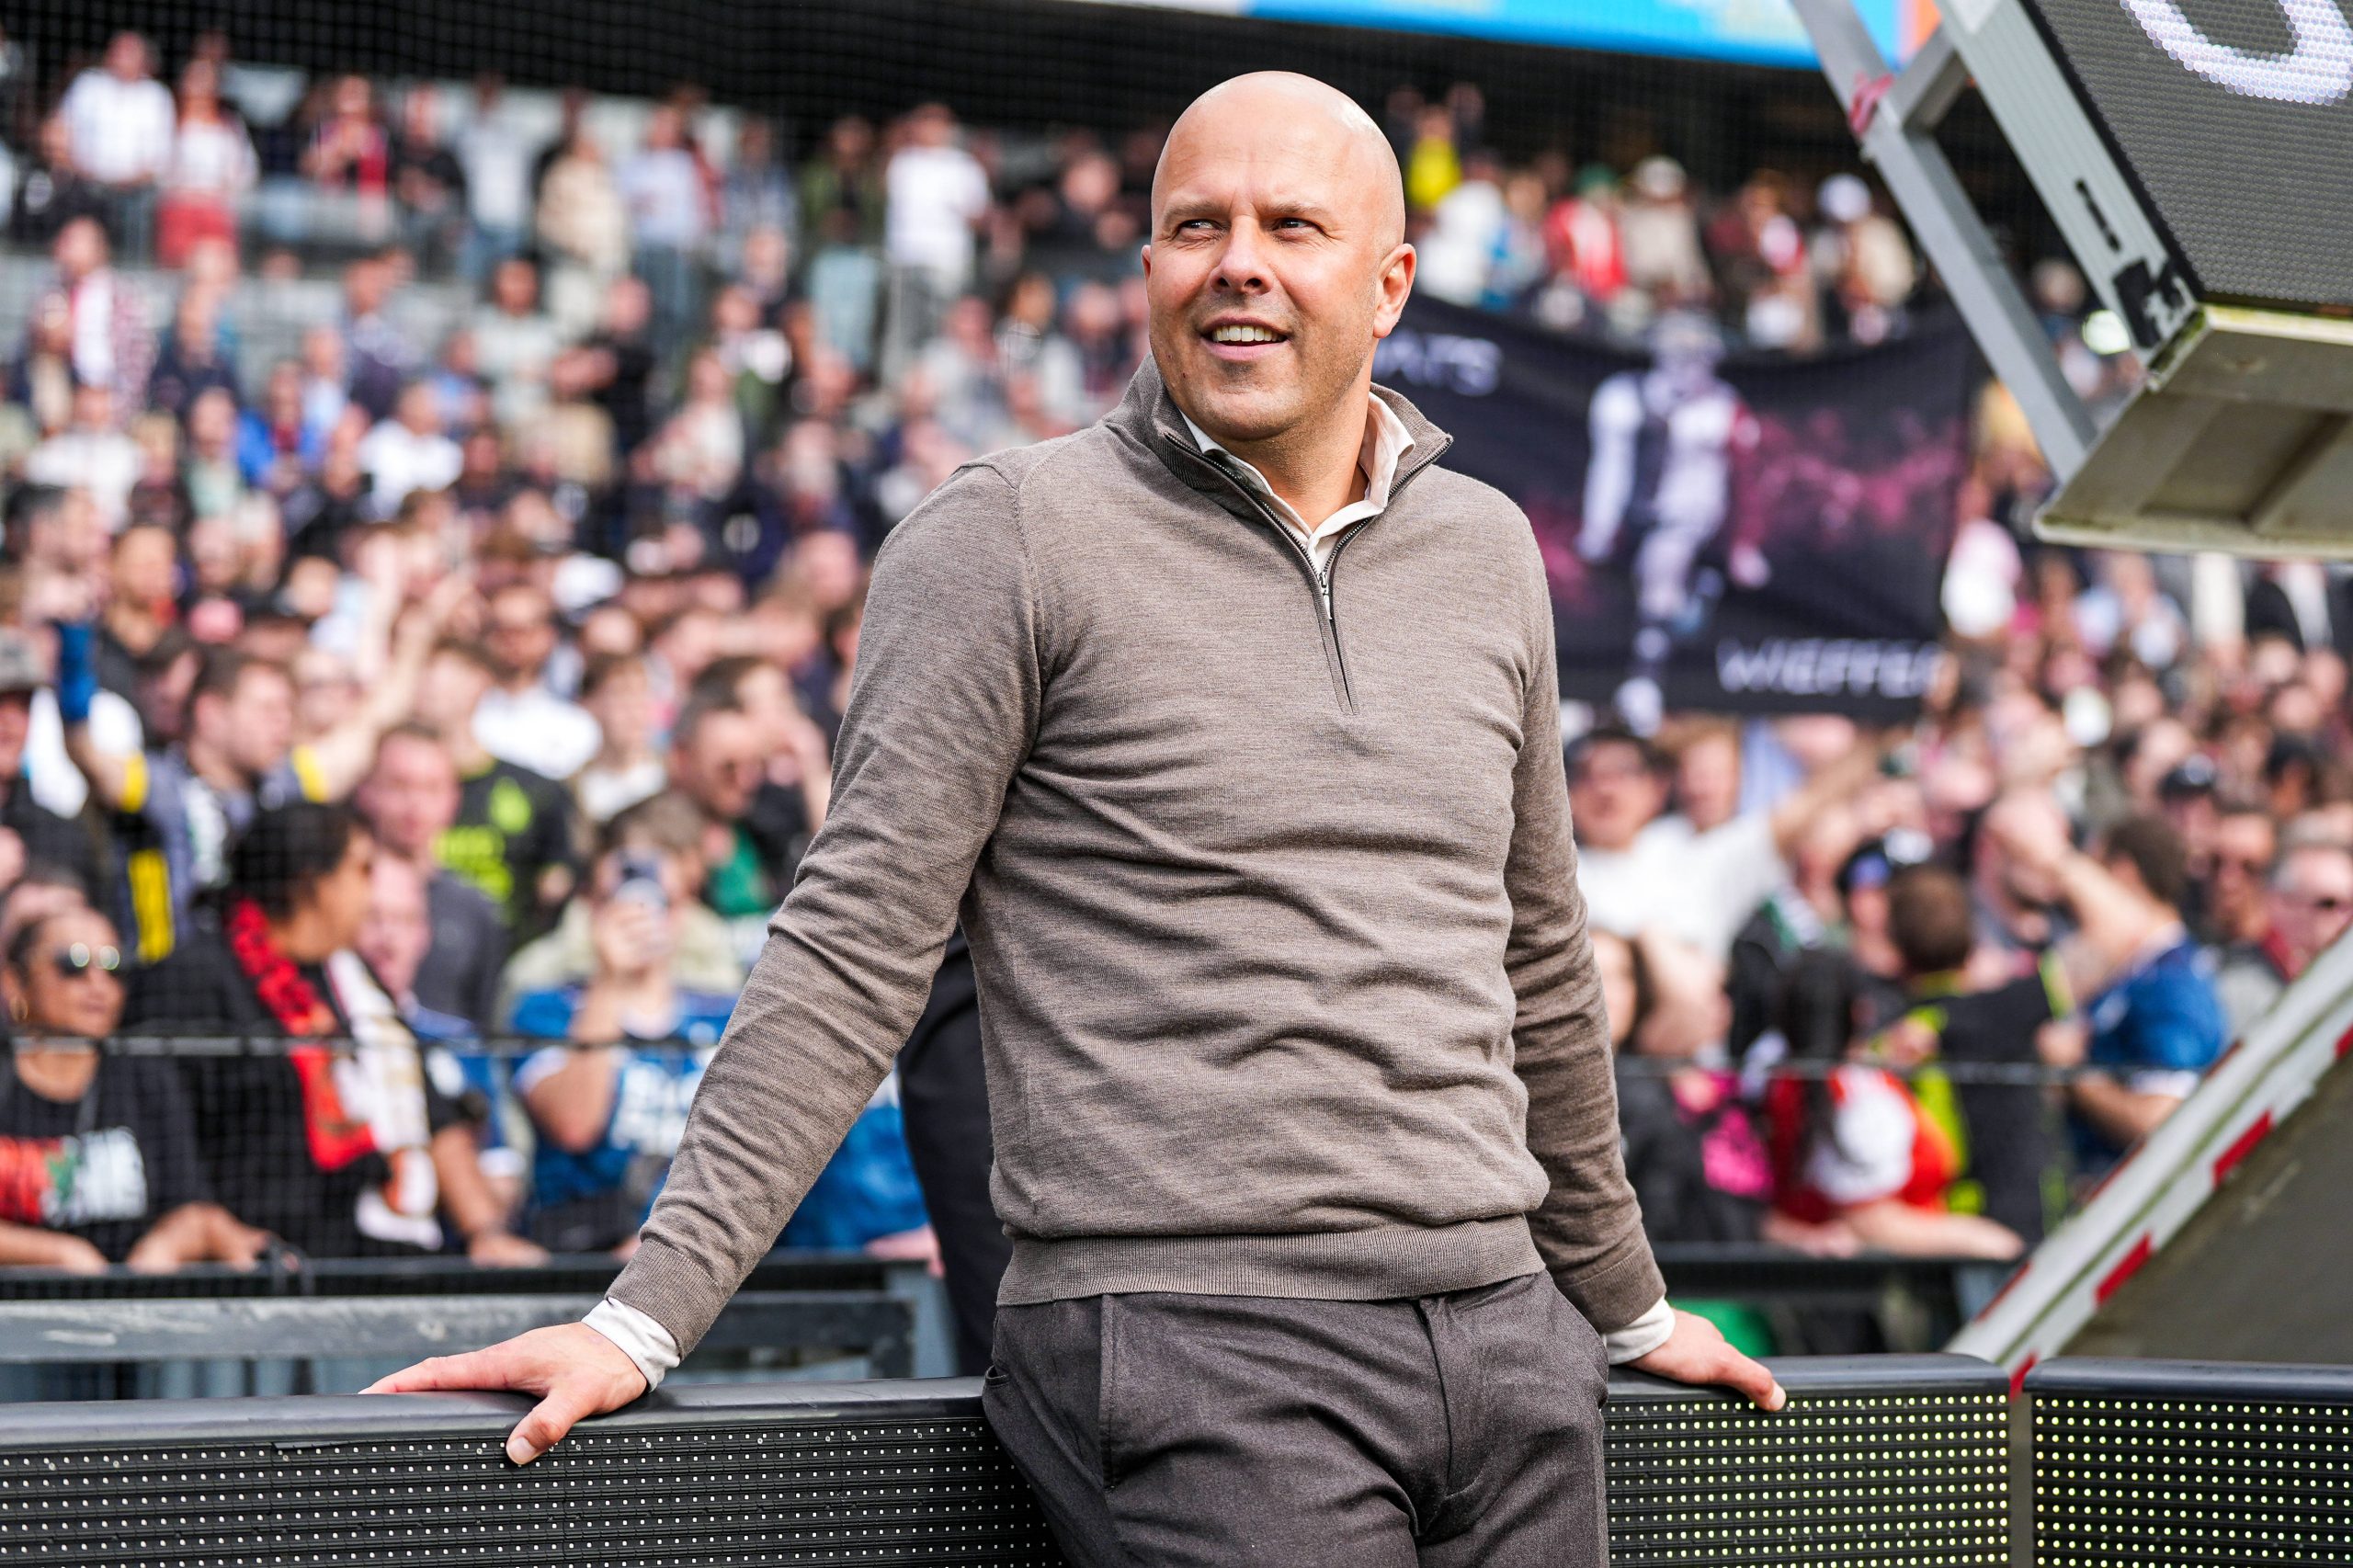 Slot, the Feyenoord head coach, has never had a run worse than two defeats in a row in his managerial career